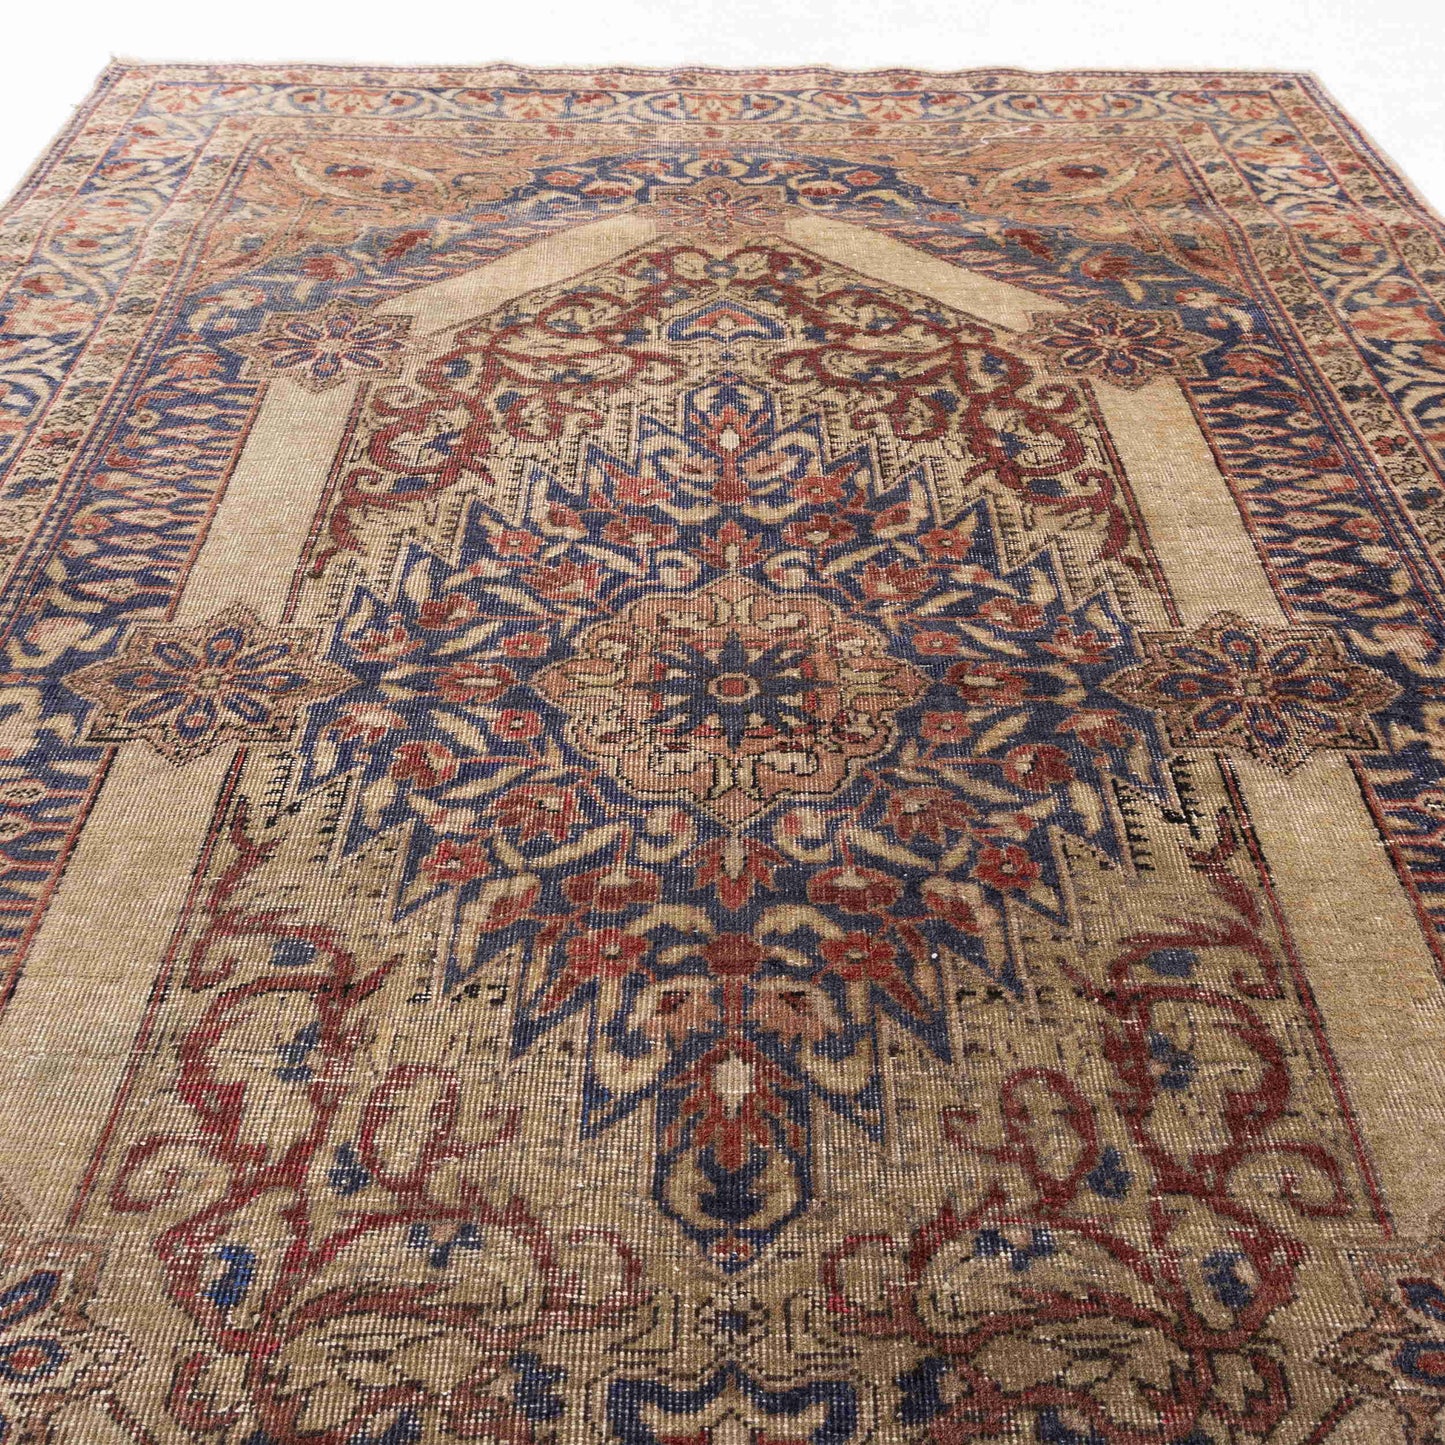 Oriental Rug Anatolian Hand Knotted Wool On Wool 121 X 185 Cm - 4' X 6' 1'' Brown C005 ER01